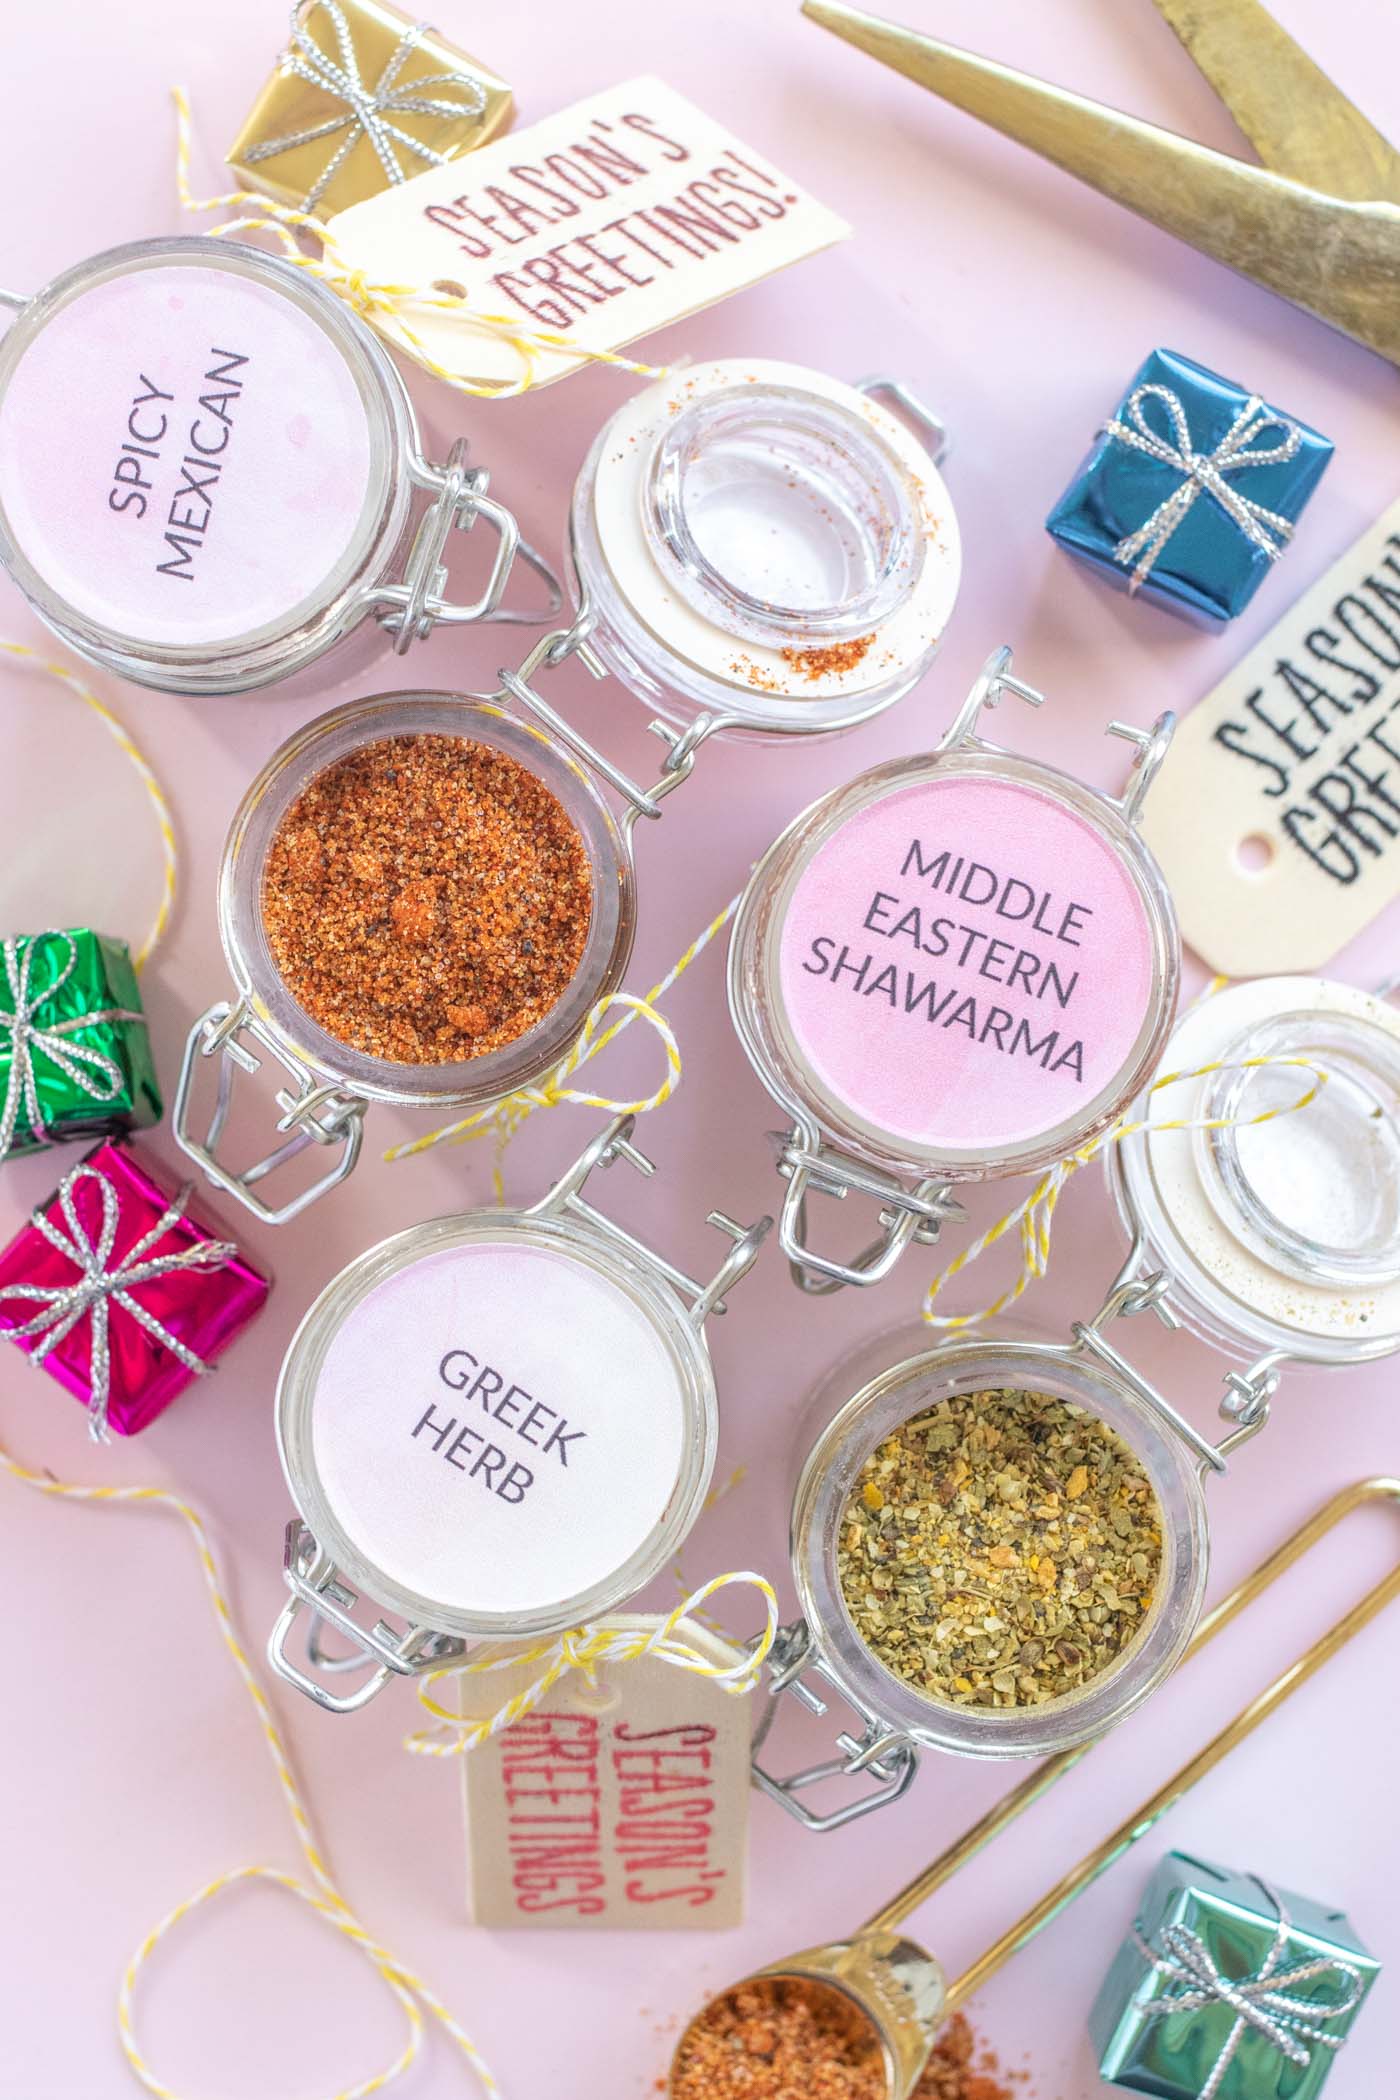 Easy Spice Mix Gifts with Darice for the Holidays // Make sweet homemade gifts using products from Darice and Consumer Crafts! Try these 5 spice mix recipes for making easy food gifts for coworkers, friends and family! #ad #giftideas #christmasgift #foodgifts #diygifts #spicemixes #stickerpaper #weddingfavors